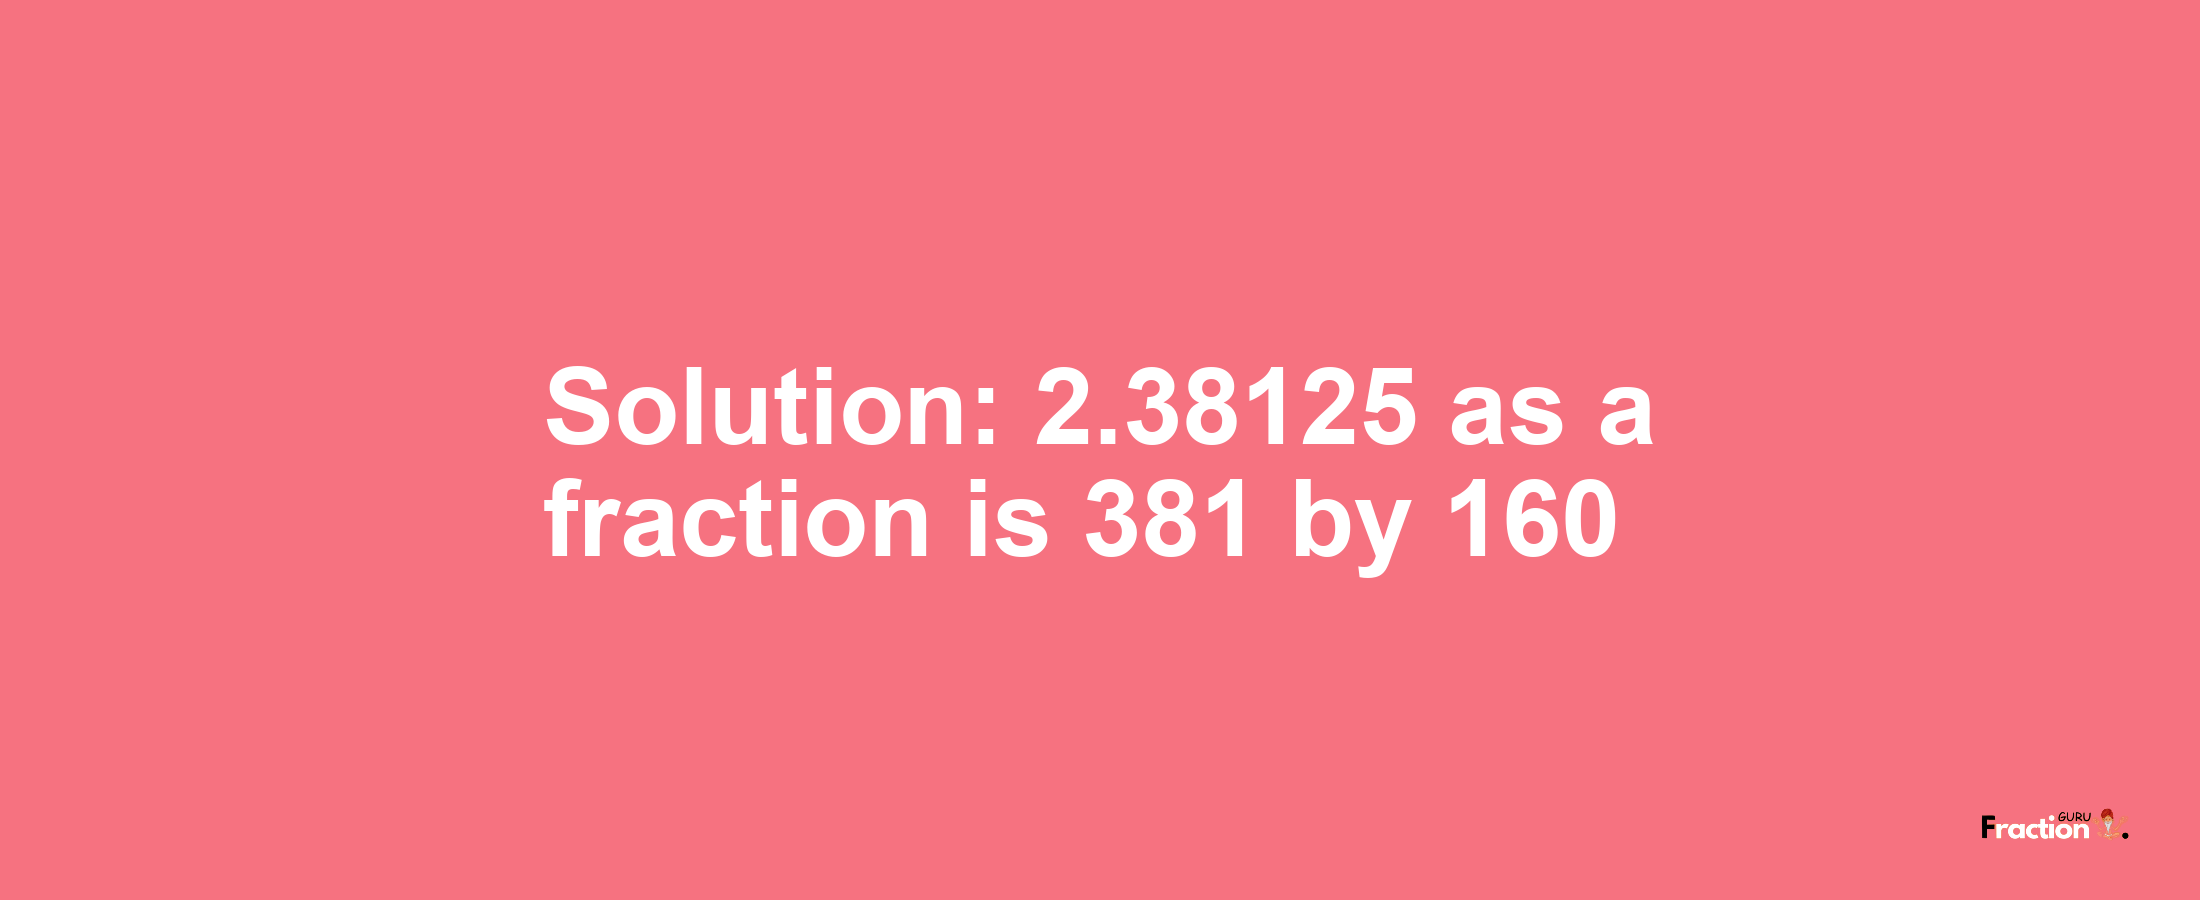 Solution:2.38125 as a fraction is 381/160